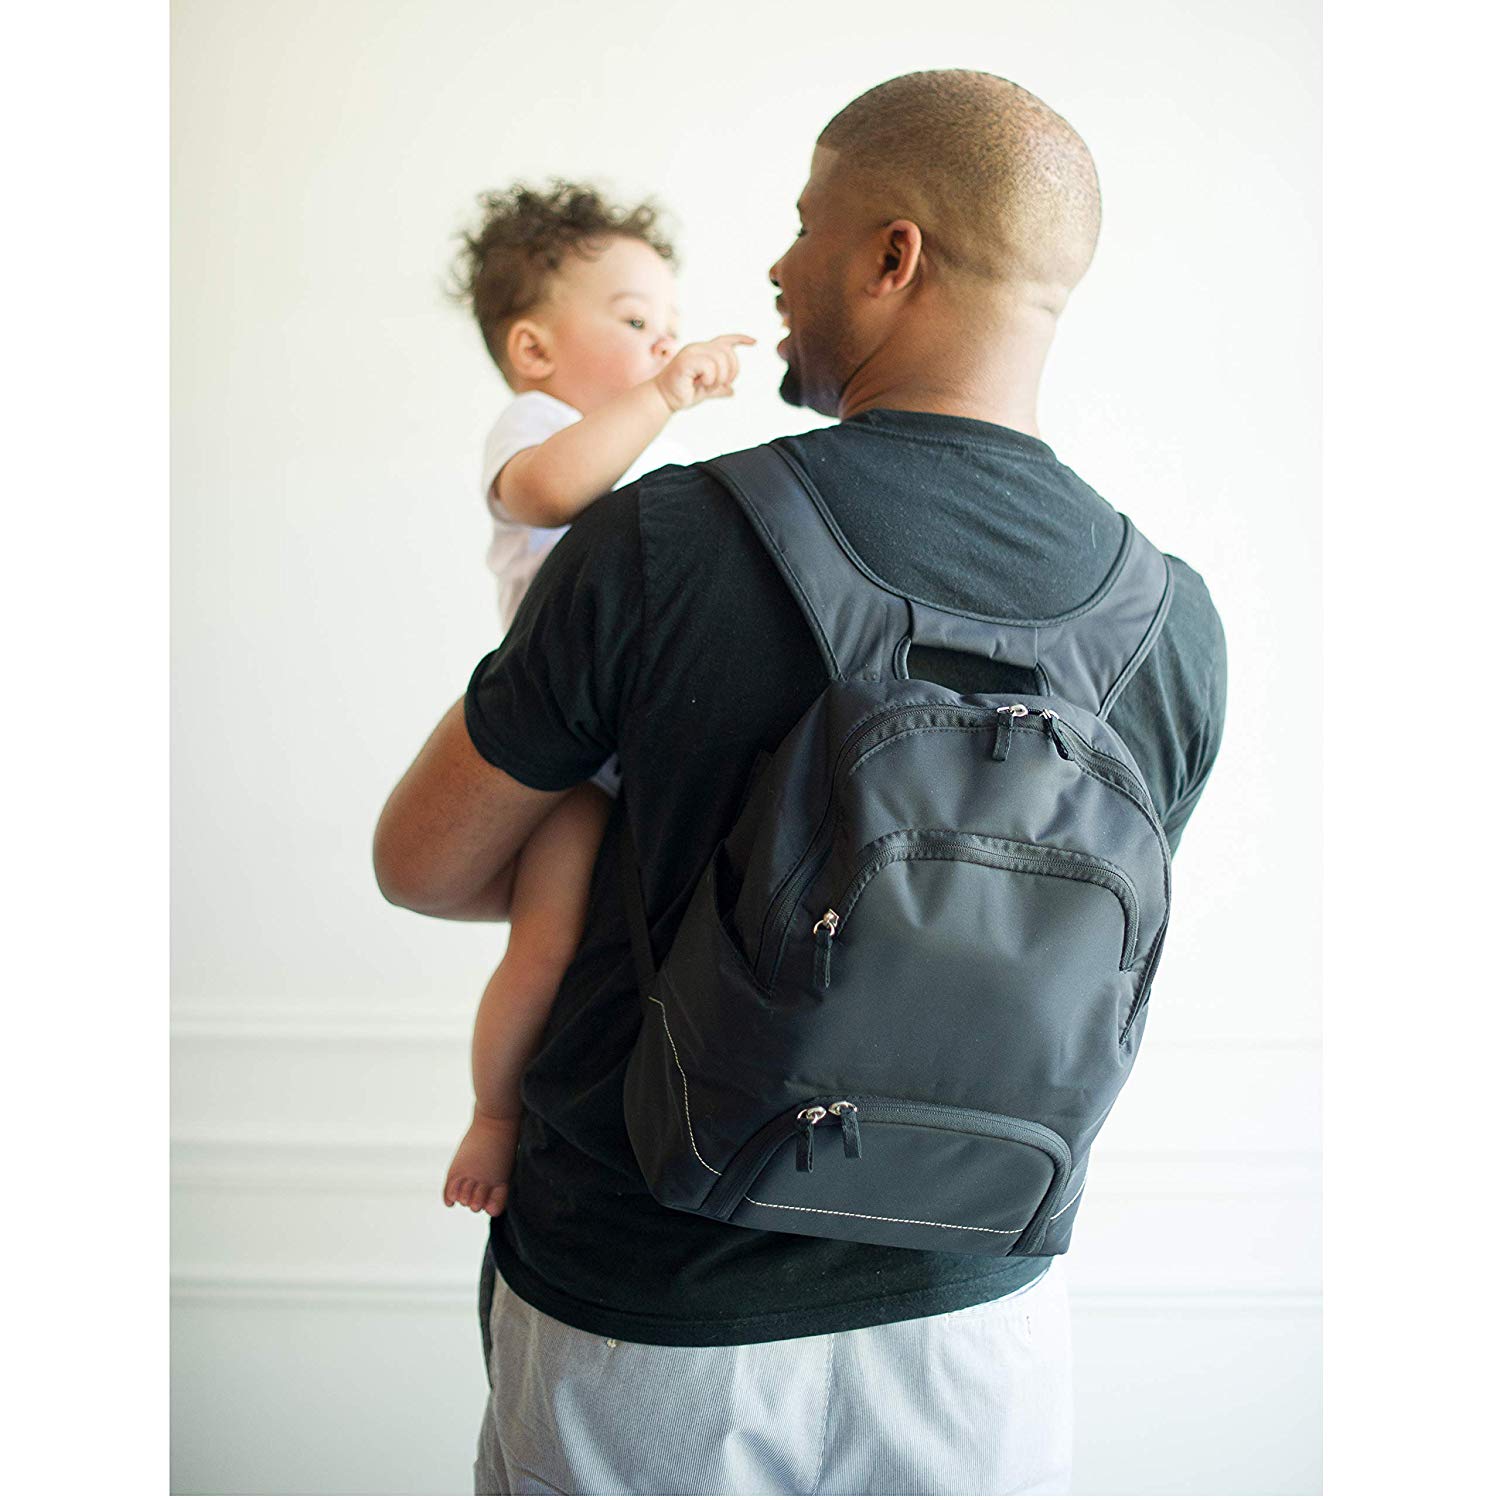 MEDELA Pump In Style® Advanced Backpack - ANB Baby -$100 - $300